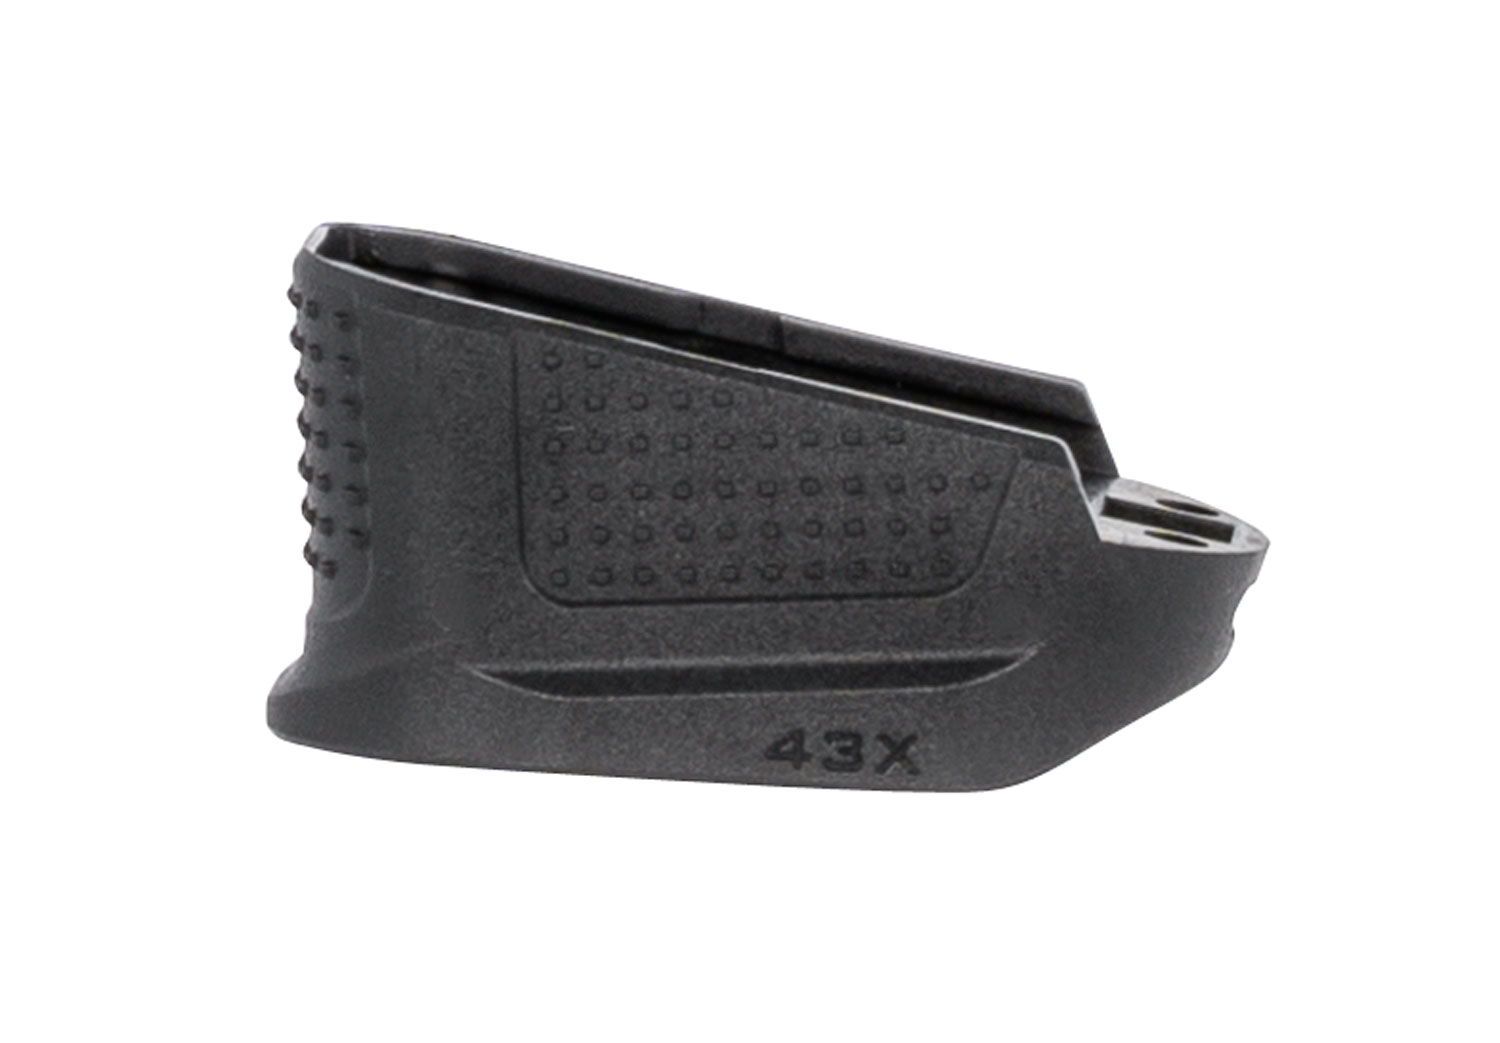 Strike Industries EMPG43XBK Enhanced Magazine Plate  made of Polymer with Black Finish & Extra Gripping Surface for Glock 43X Magazines (Adds 2rds)